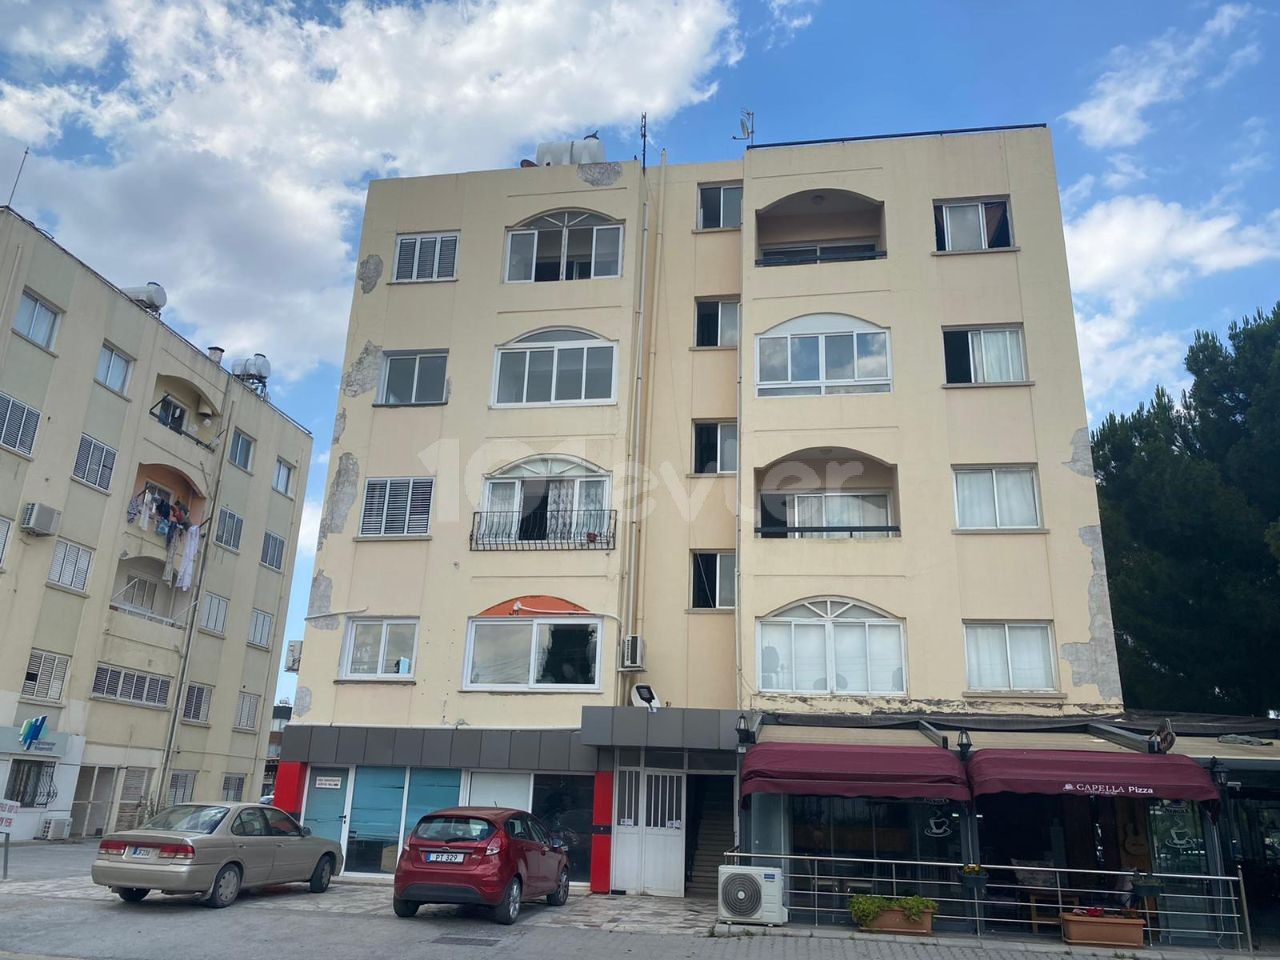 Ortakoy de 3 + 1 135m2 Apartment for Sale On the Main Road with No Cost Decker 49,000stg ** 